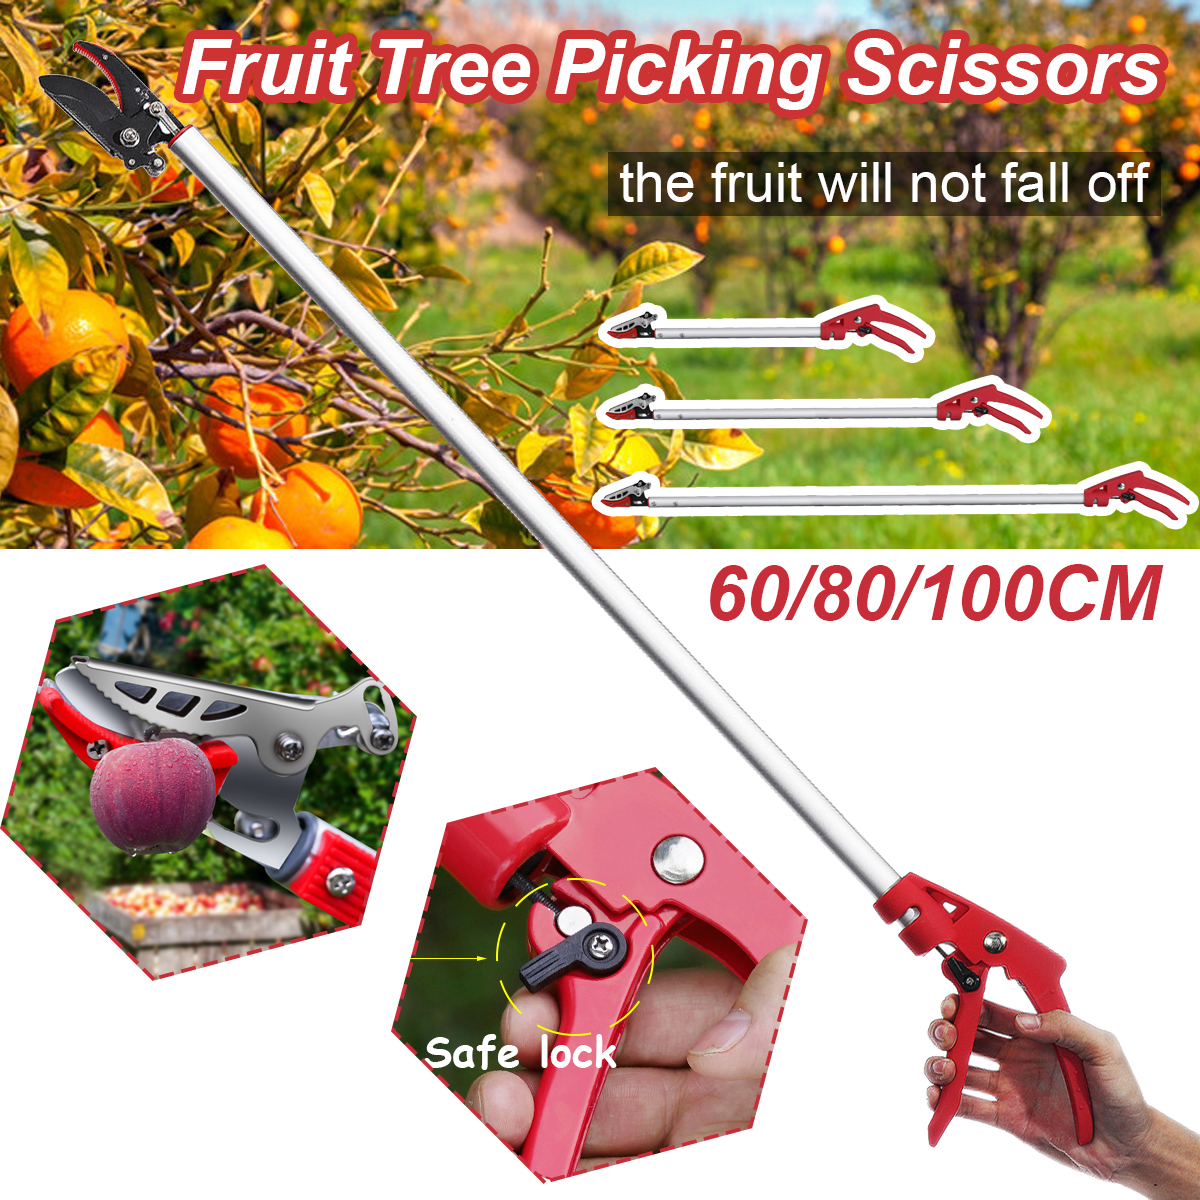 Professional-Grafting-Tool-Pruning-Garden-Shears-for-Cutting-Stems-Light-Branches-of-Trees-Rose-Bush-1601292-1